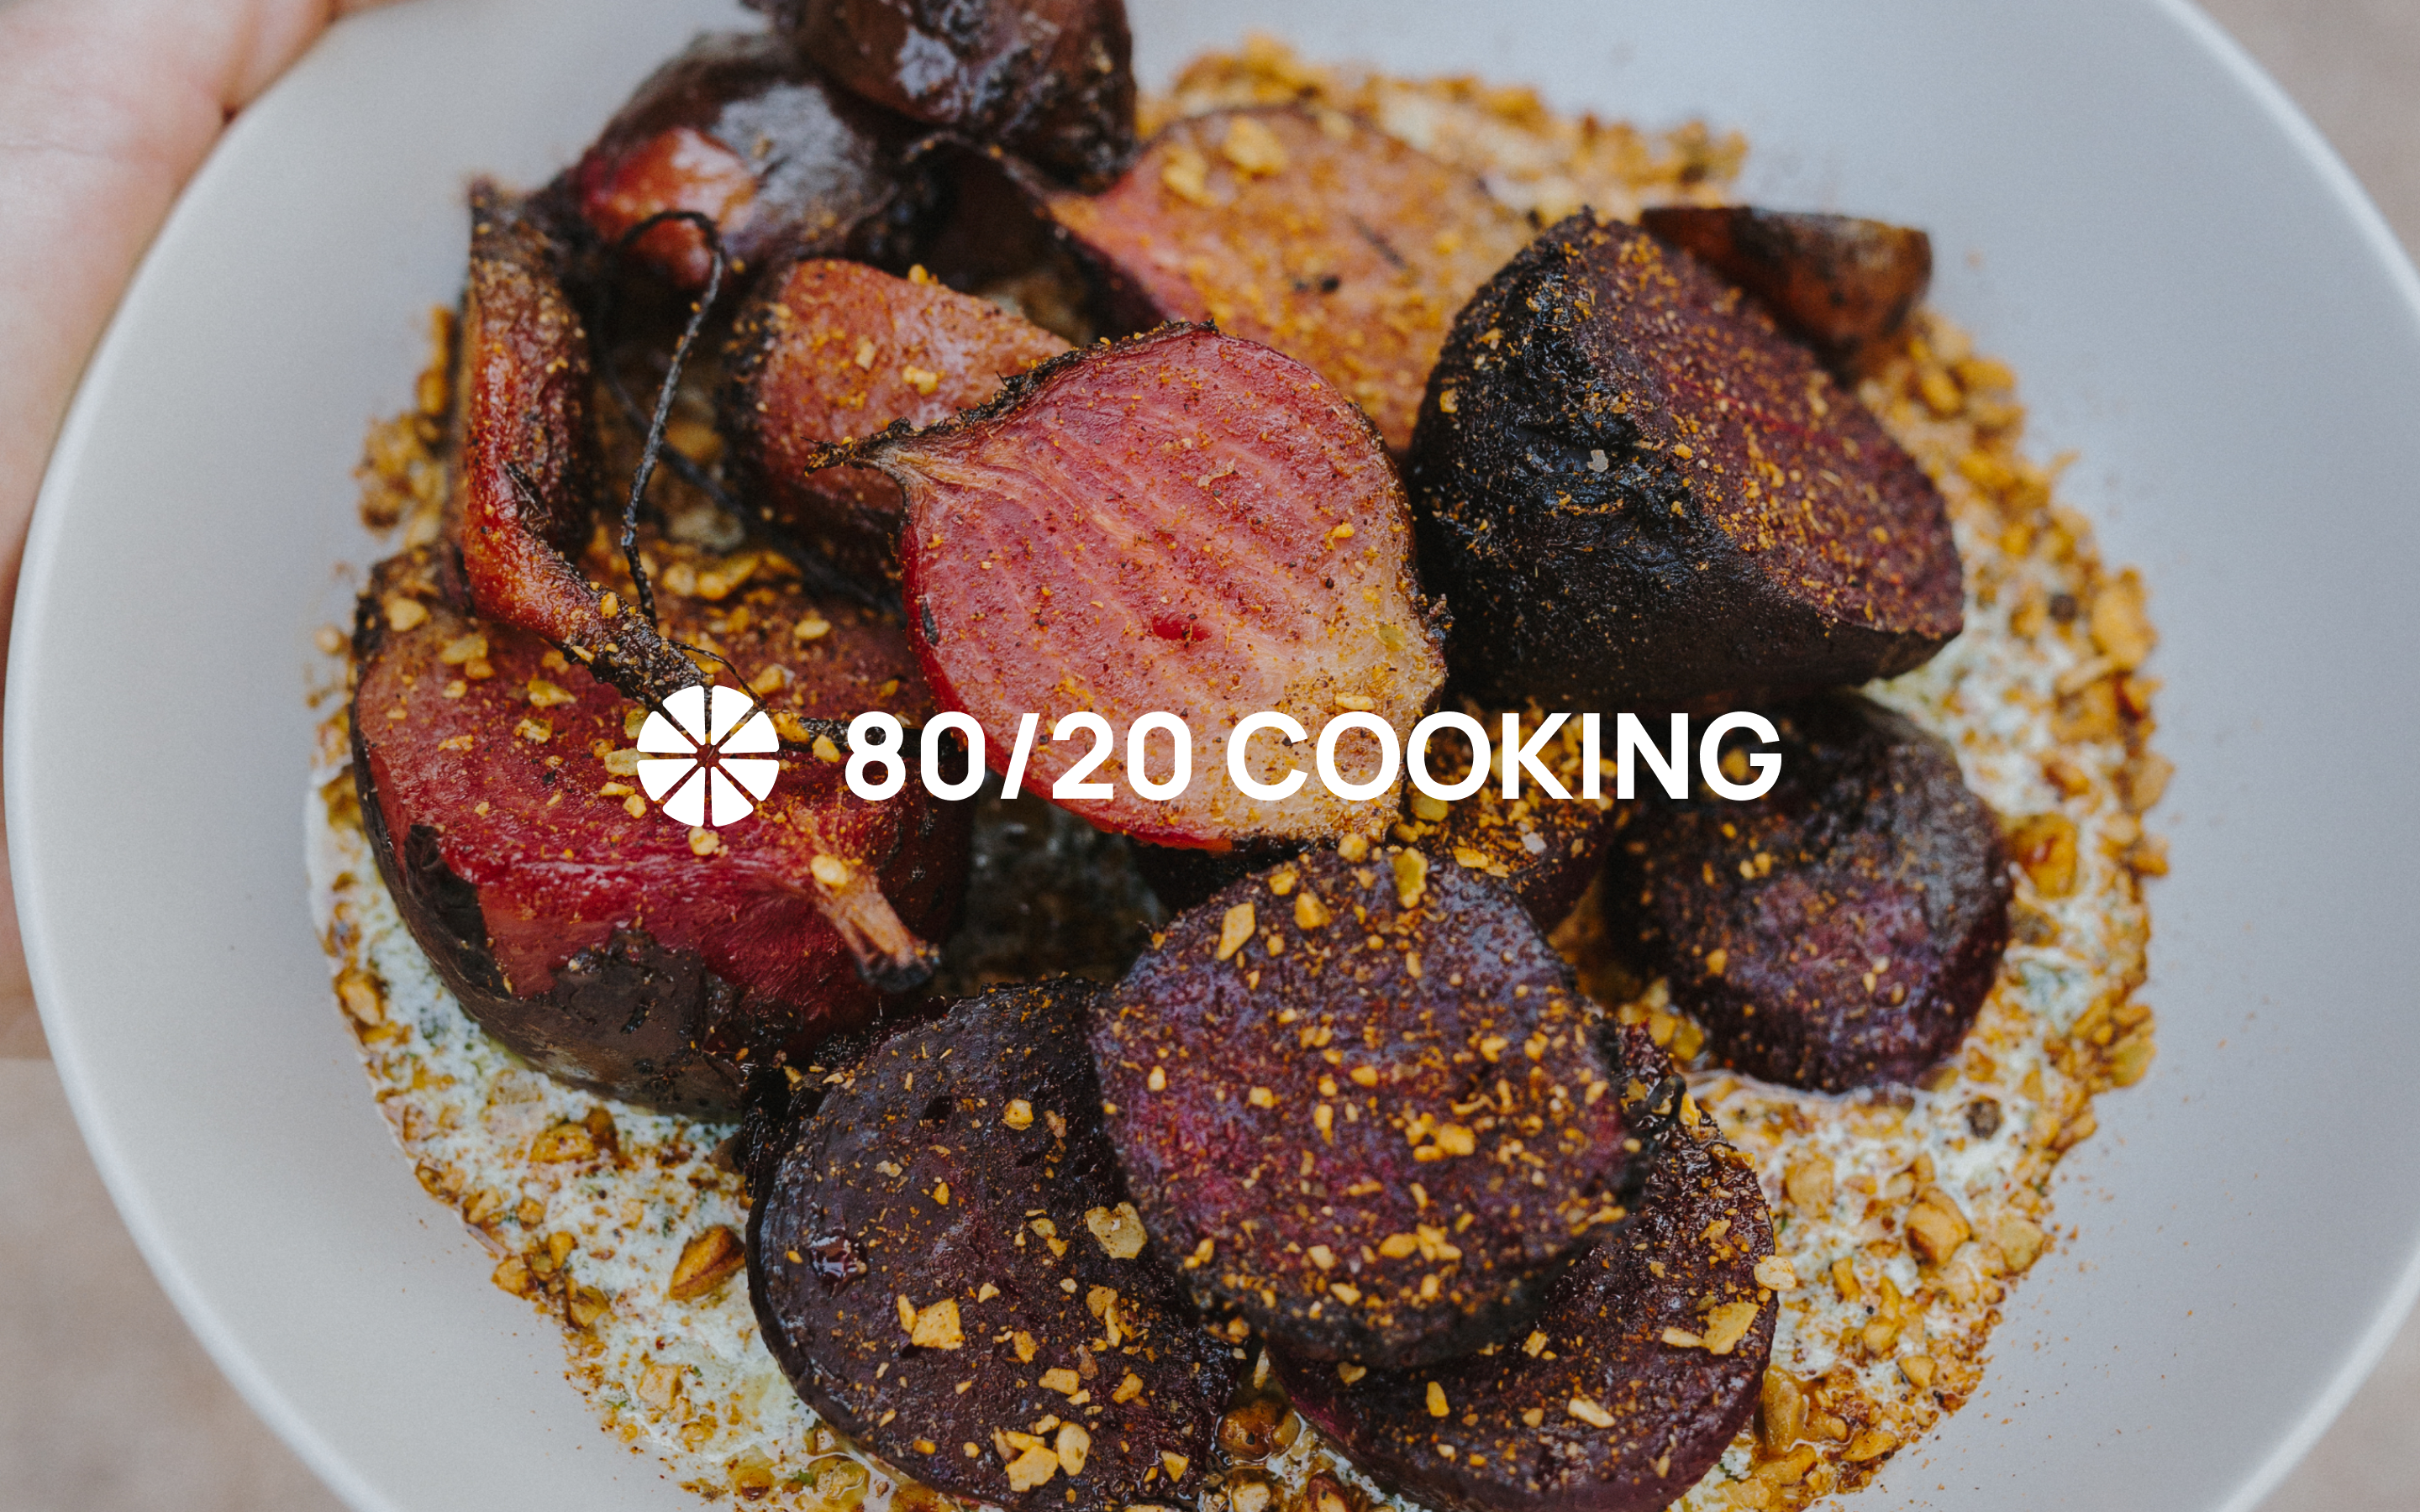 A preview browser image of the plan cards for a website called 80/20 Cooking.